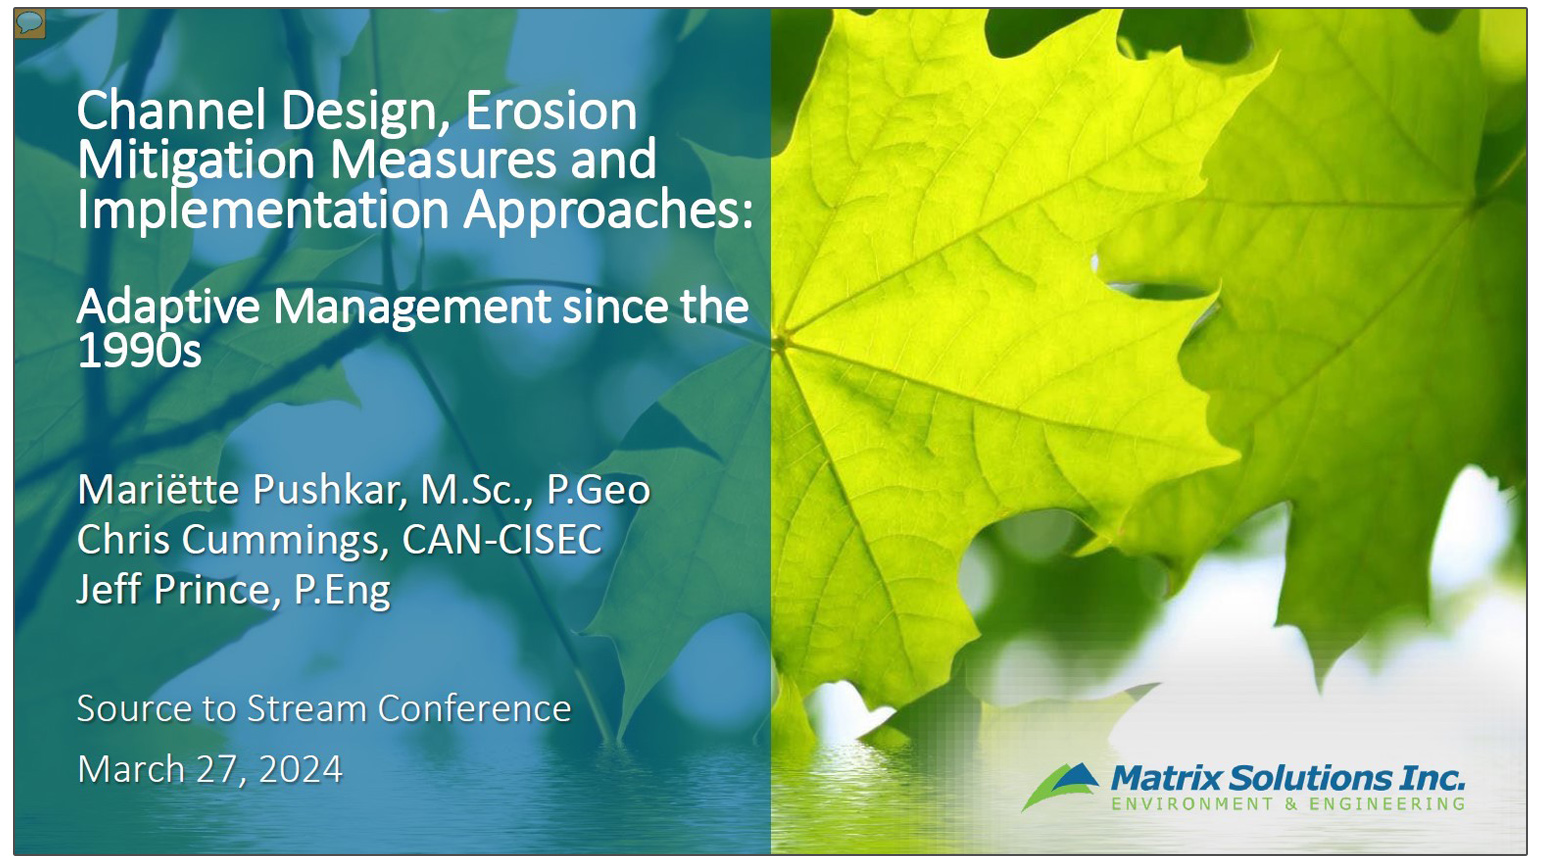 Channel Design, Erosion Mitigation Measures, and Implementation Approaches - Adaptive Management Since the 1990s - presentation by Mariette Pushkar Chris Cummings and Jeff Prince,